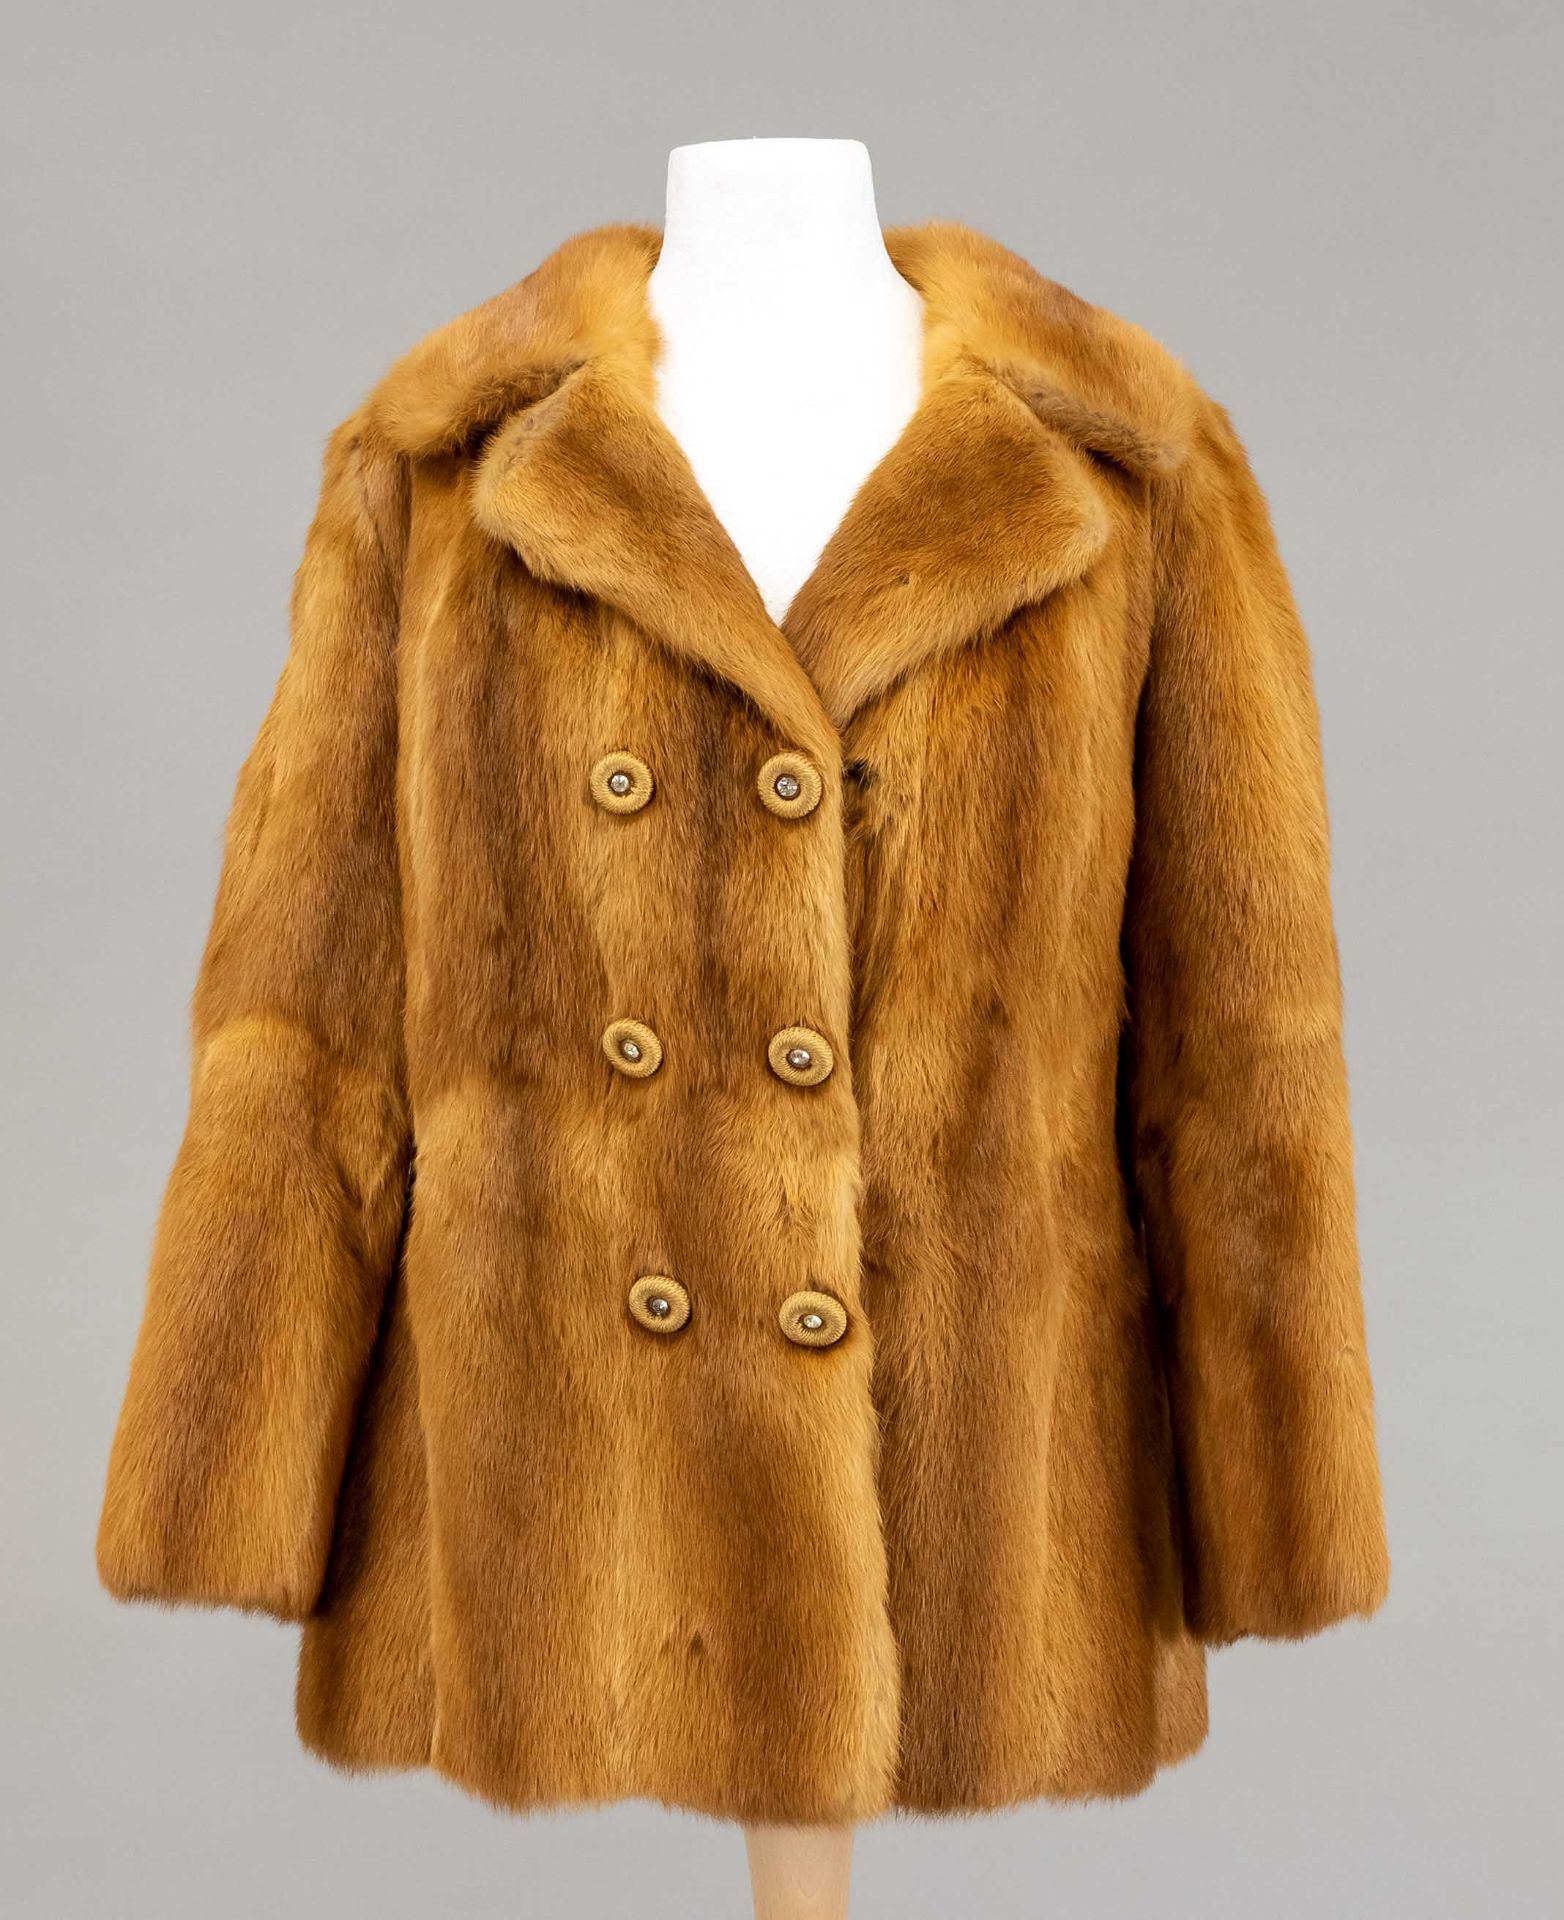 Ladies fur jacket, on a label in the lining marked Berliner Chic, without size indication, light